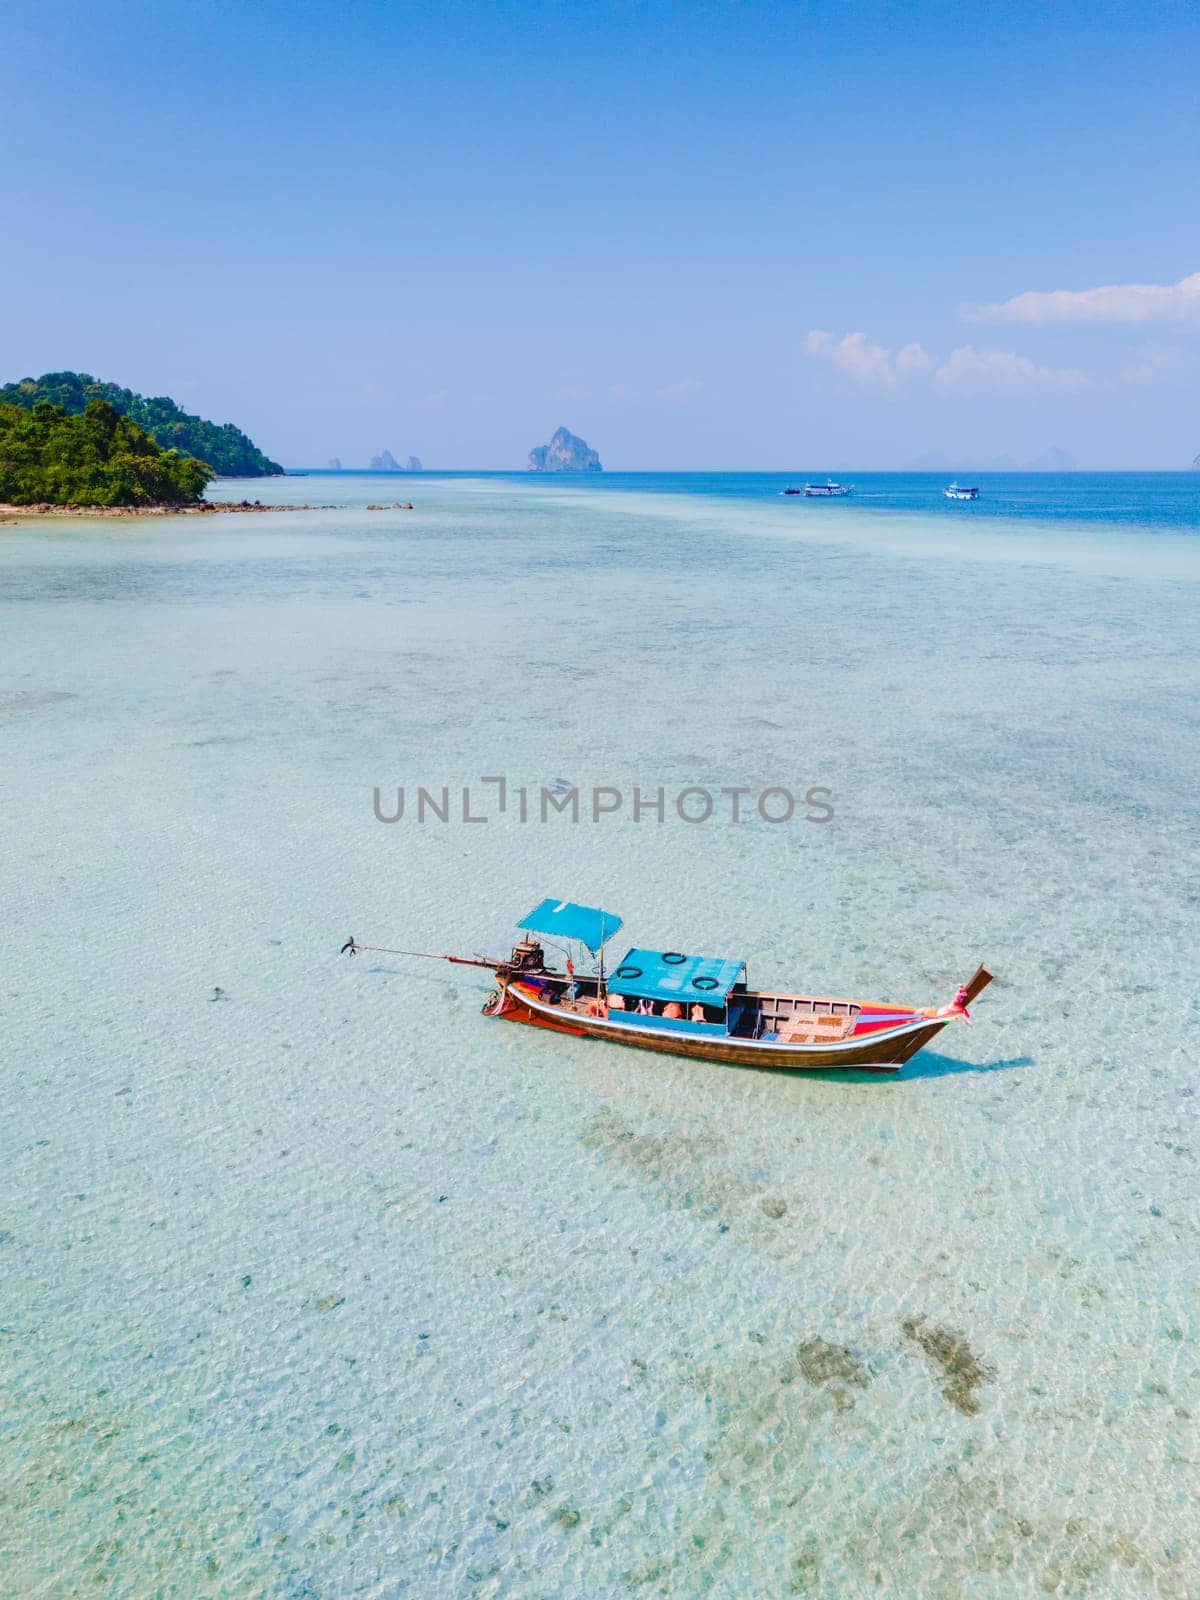 longtail boat in the turqouse colored ocean with clear water at Koh Kradan a tropical island in Trang Thailand